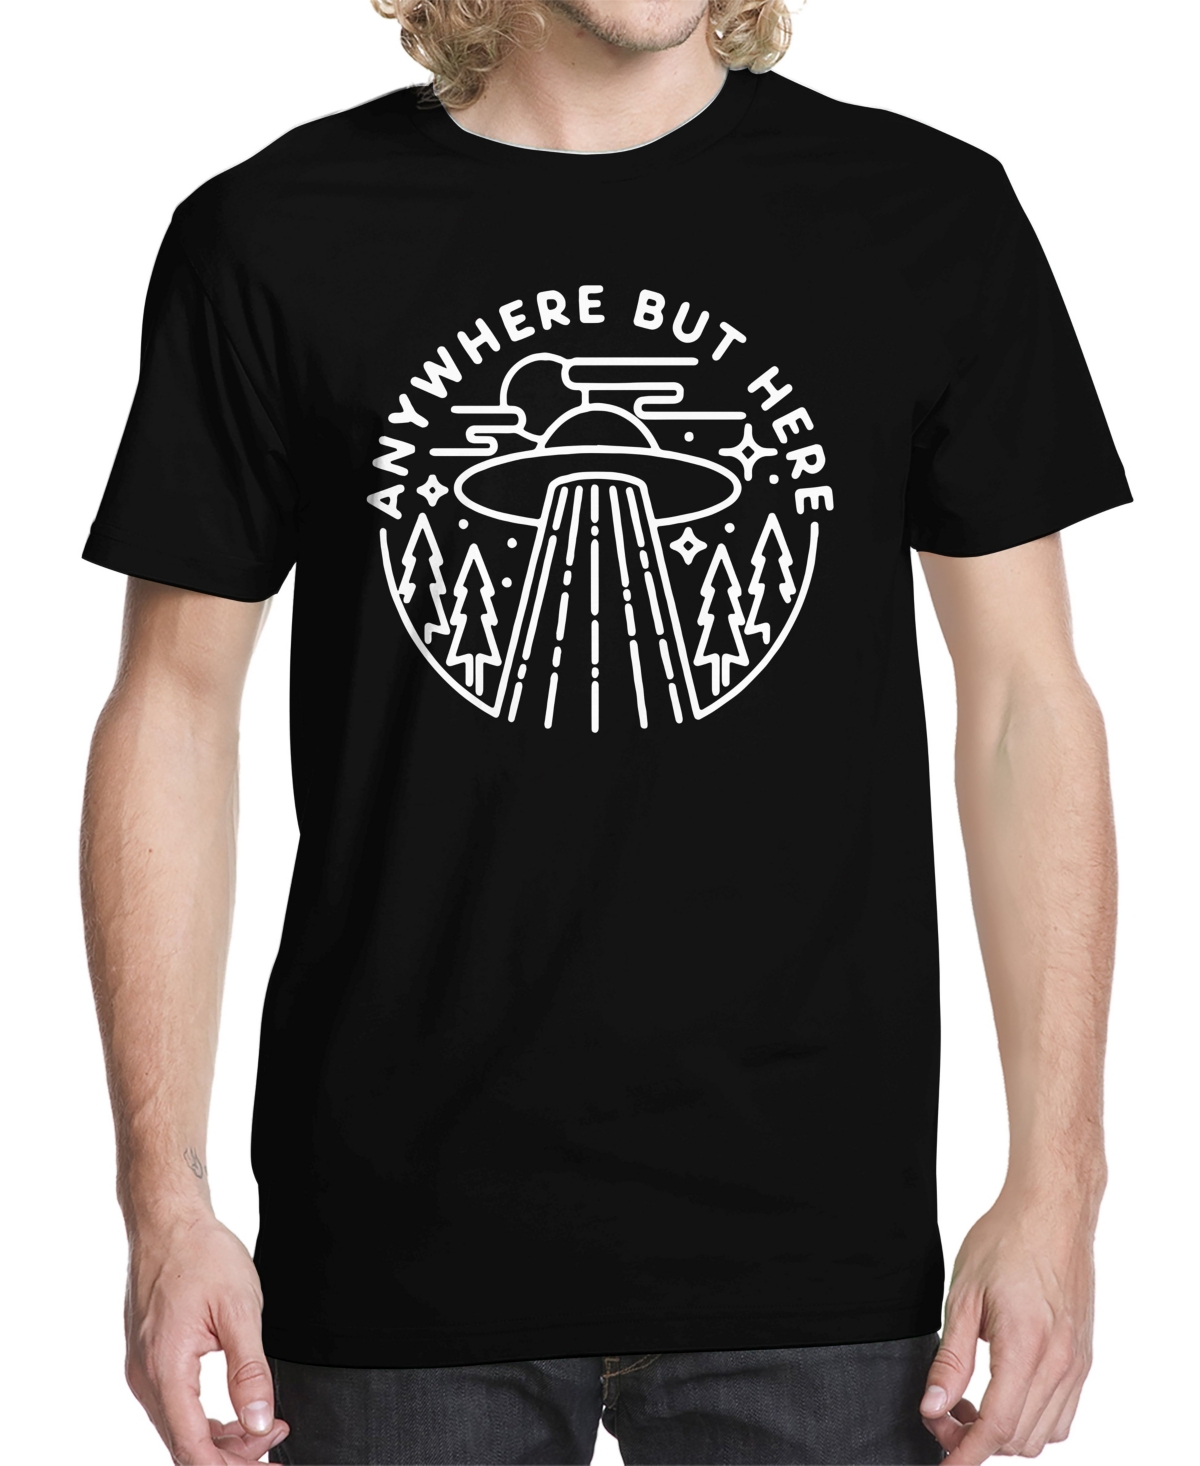 Men's Anywhere But Here Graphic T-shirt - Black